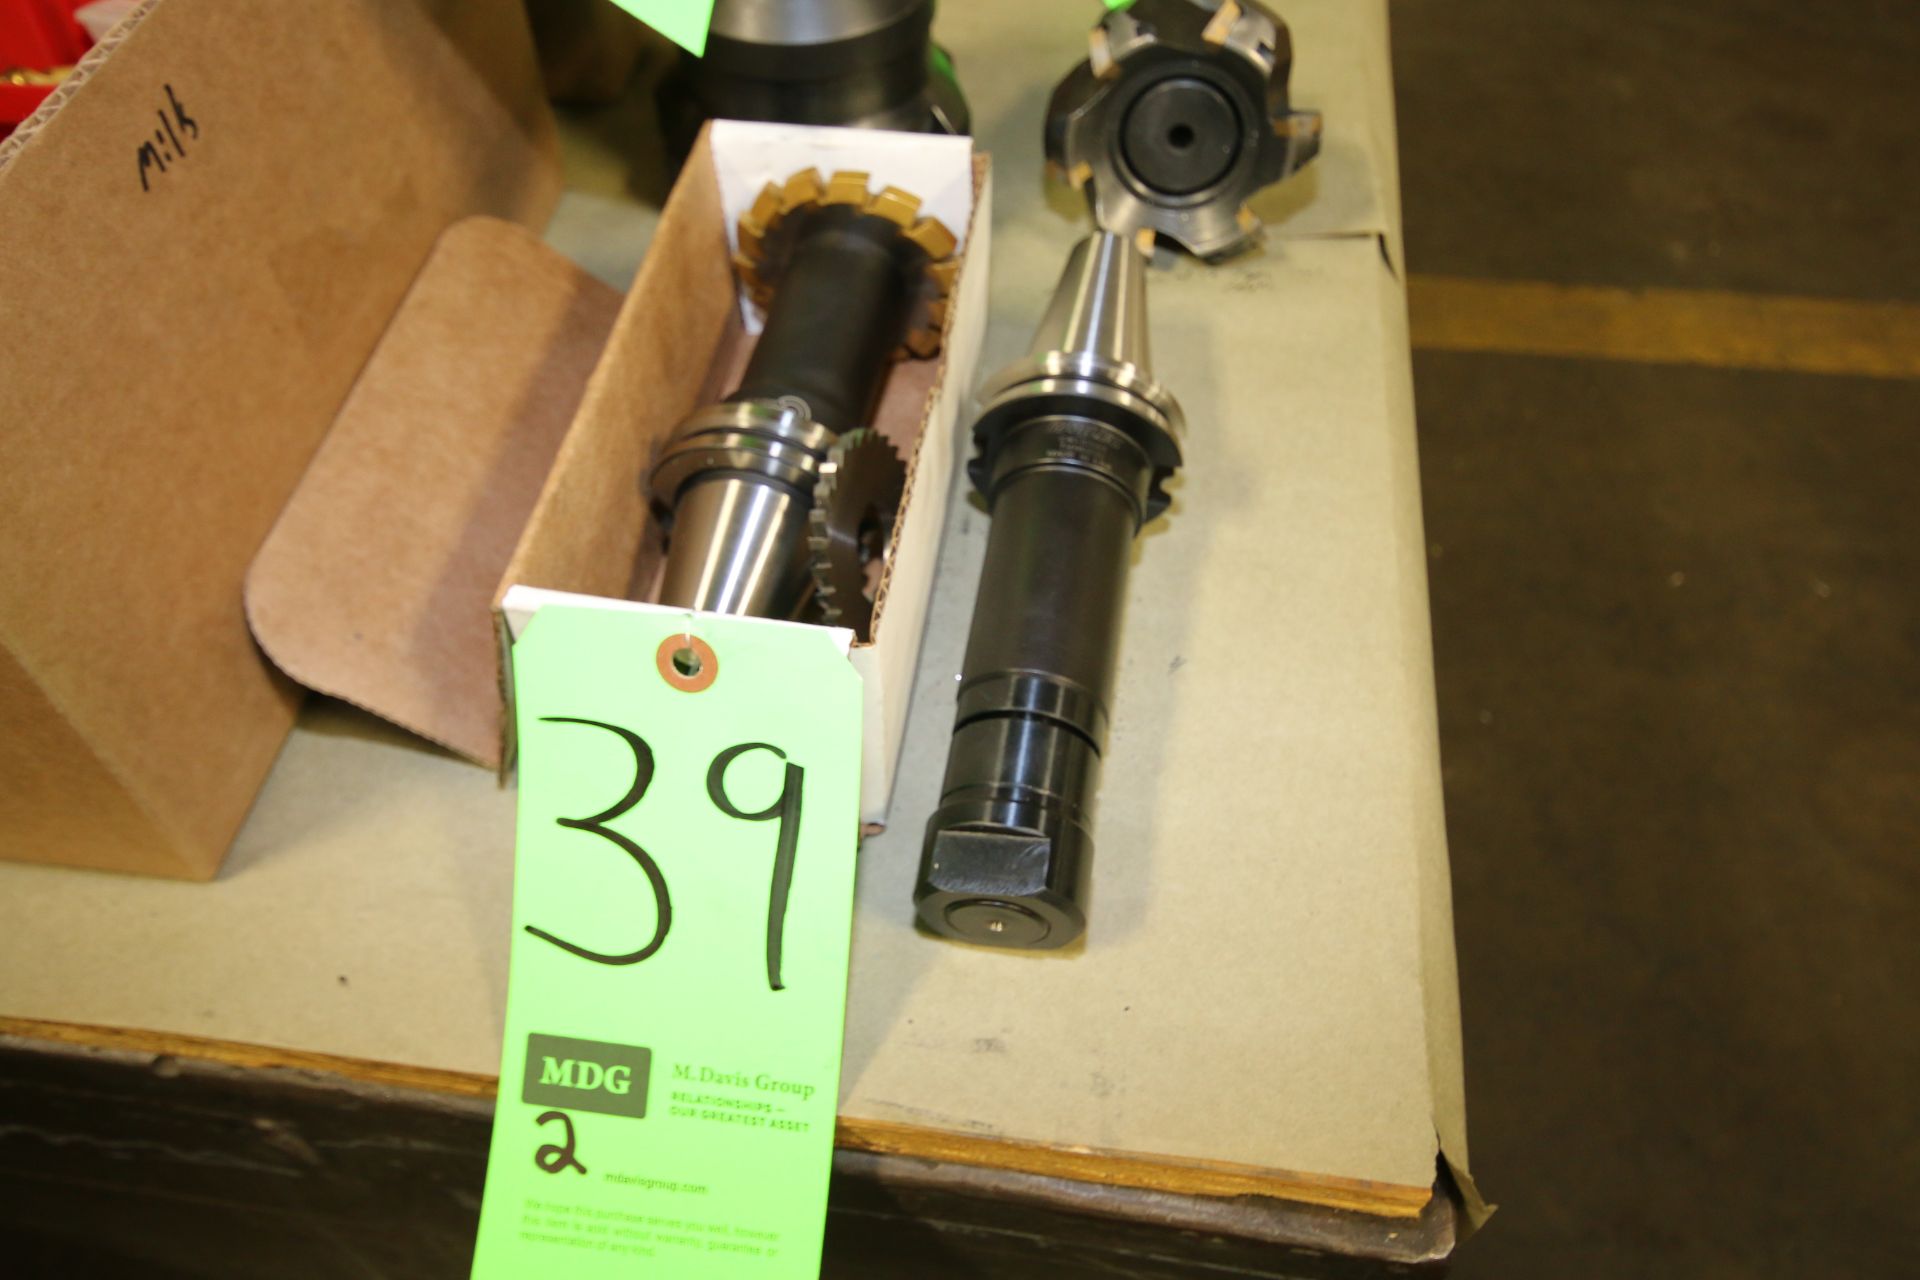 CAT40 Taper Tool Holders - (1) Parlec Model C40-10SAA4 TH4812130 and (1) Command C4G4-1000